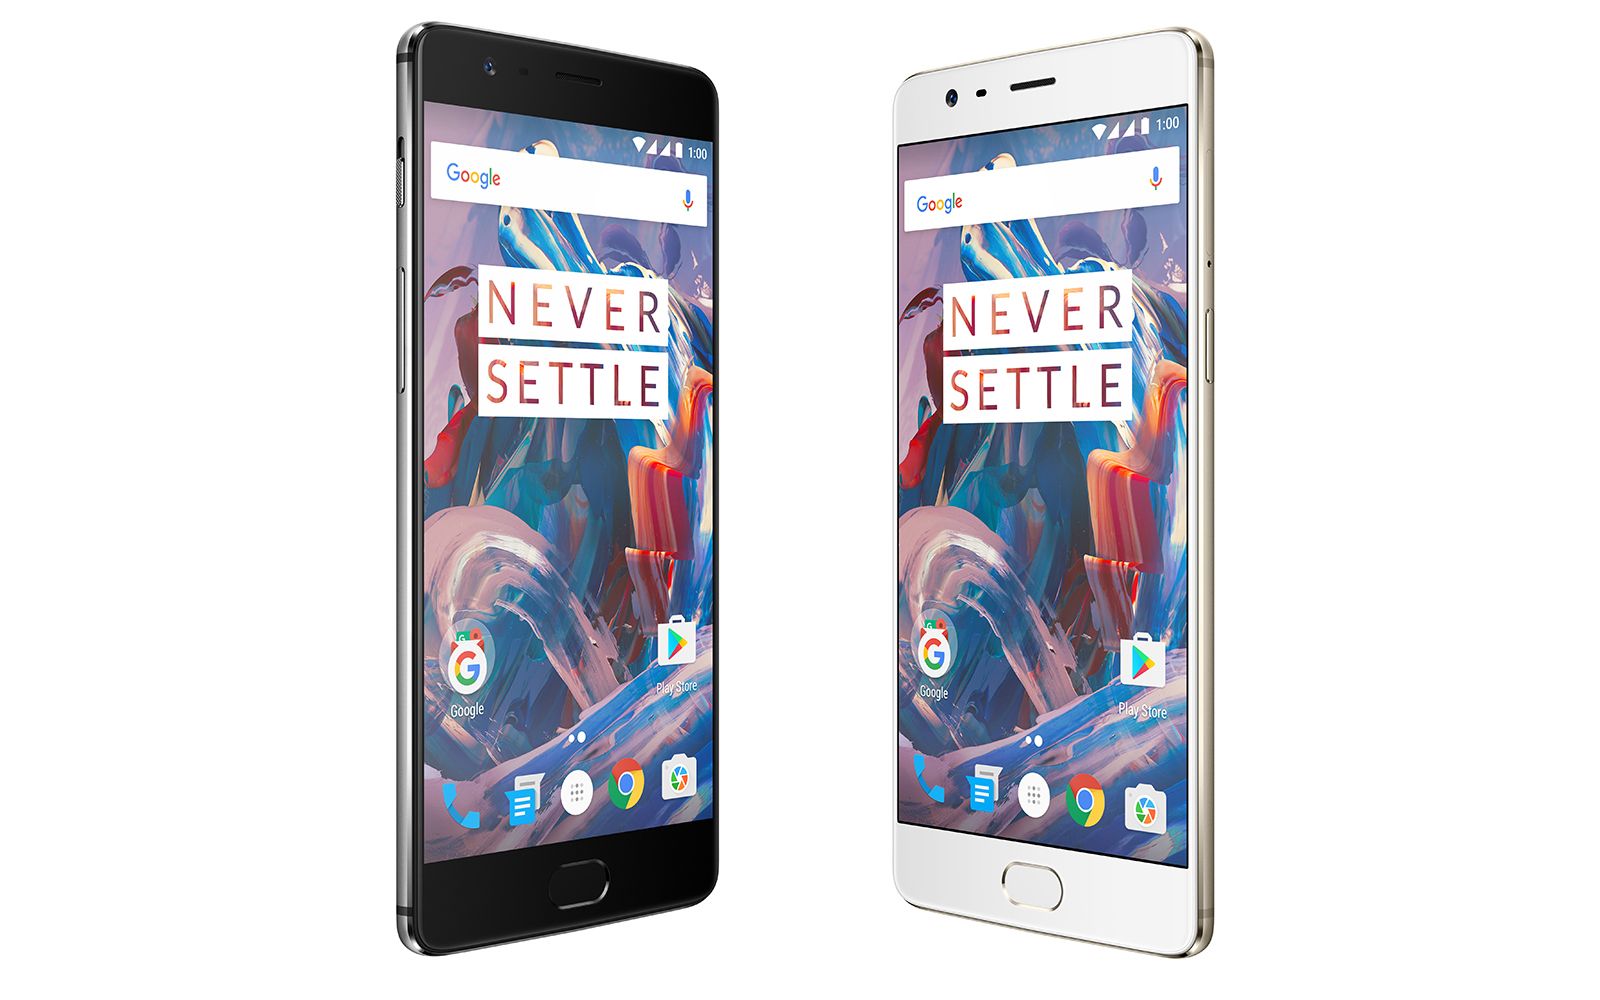 oneplus 3 is official equipped with huge 6gb ram and an all new all metal finish image 1